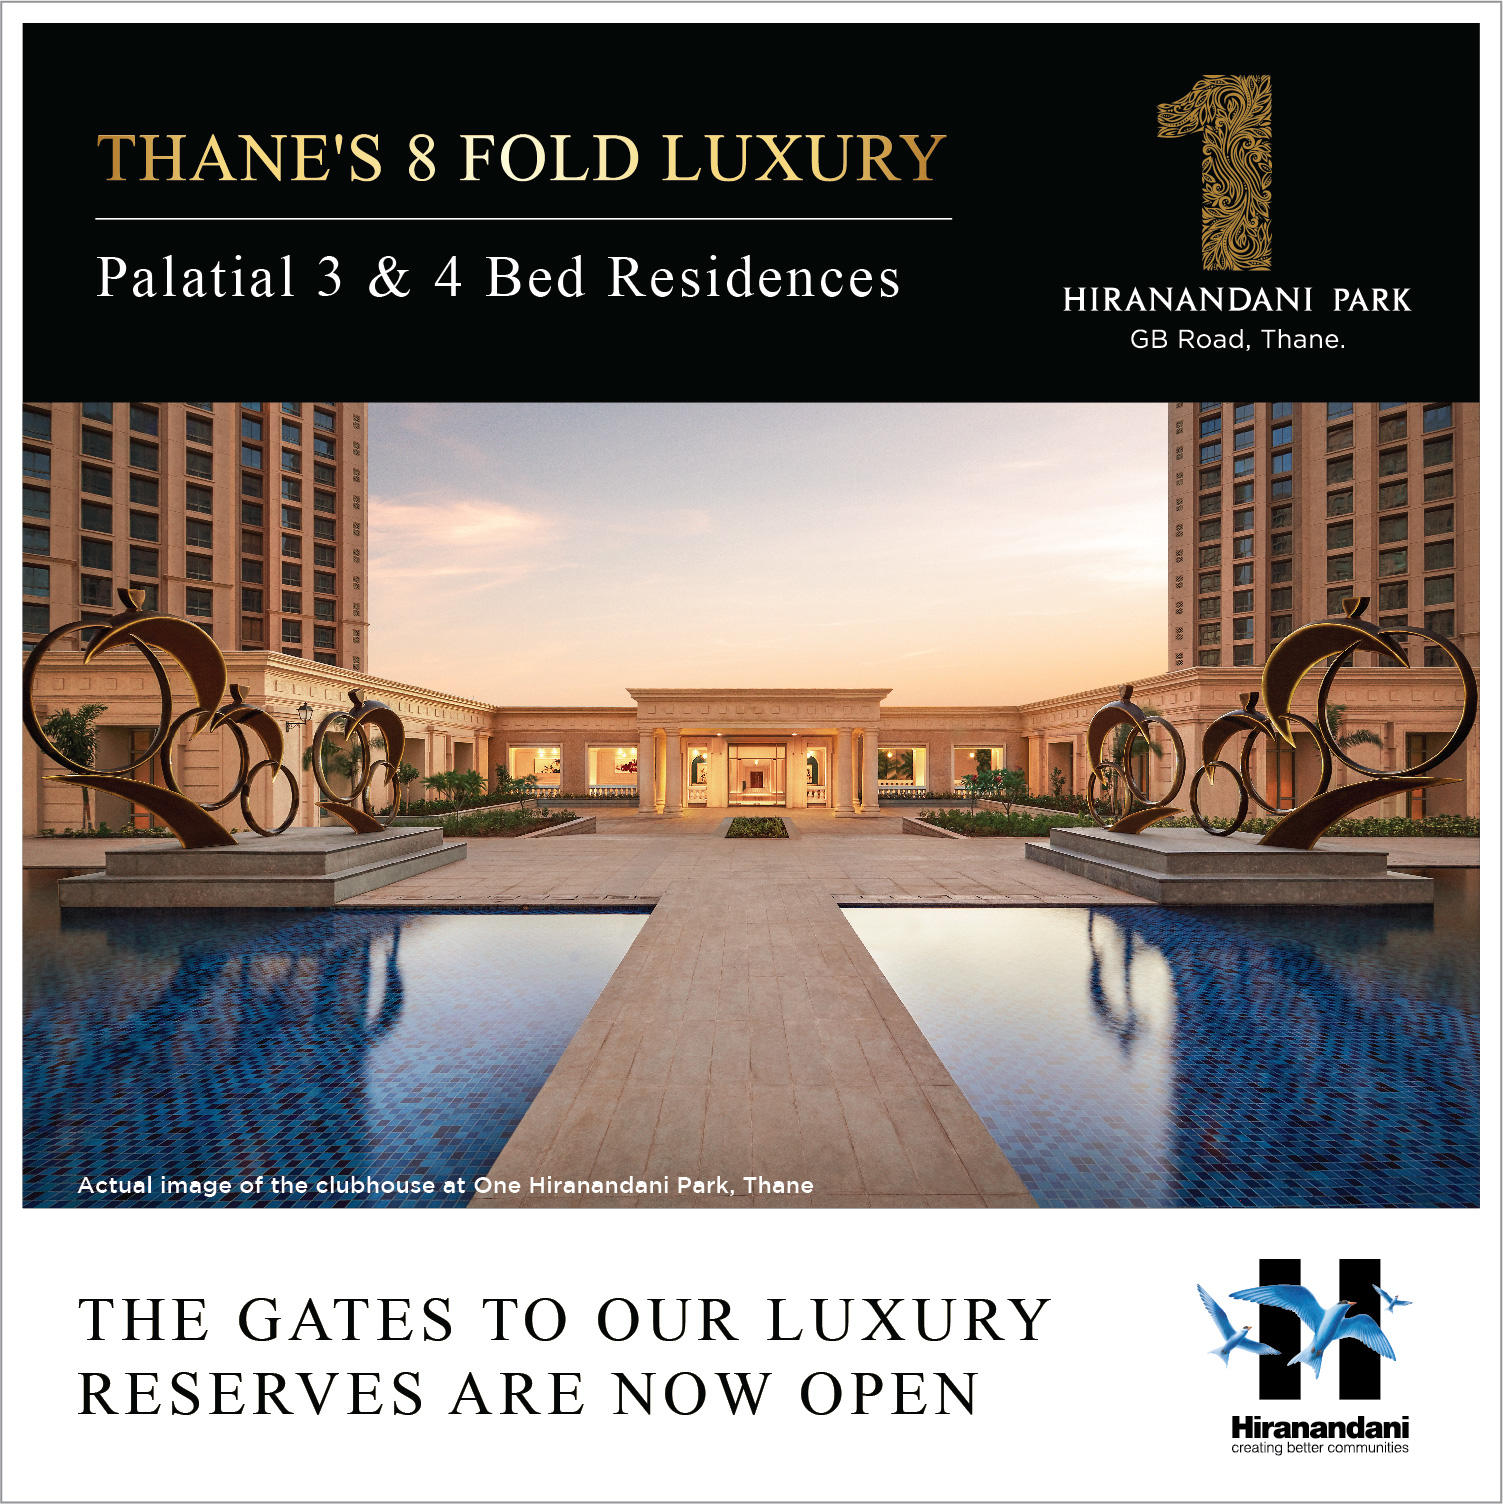 Presenting the gates to our luxury reserves are now open at One Hiranandani Park, Mumbai